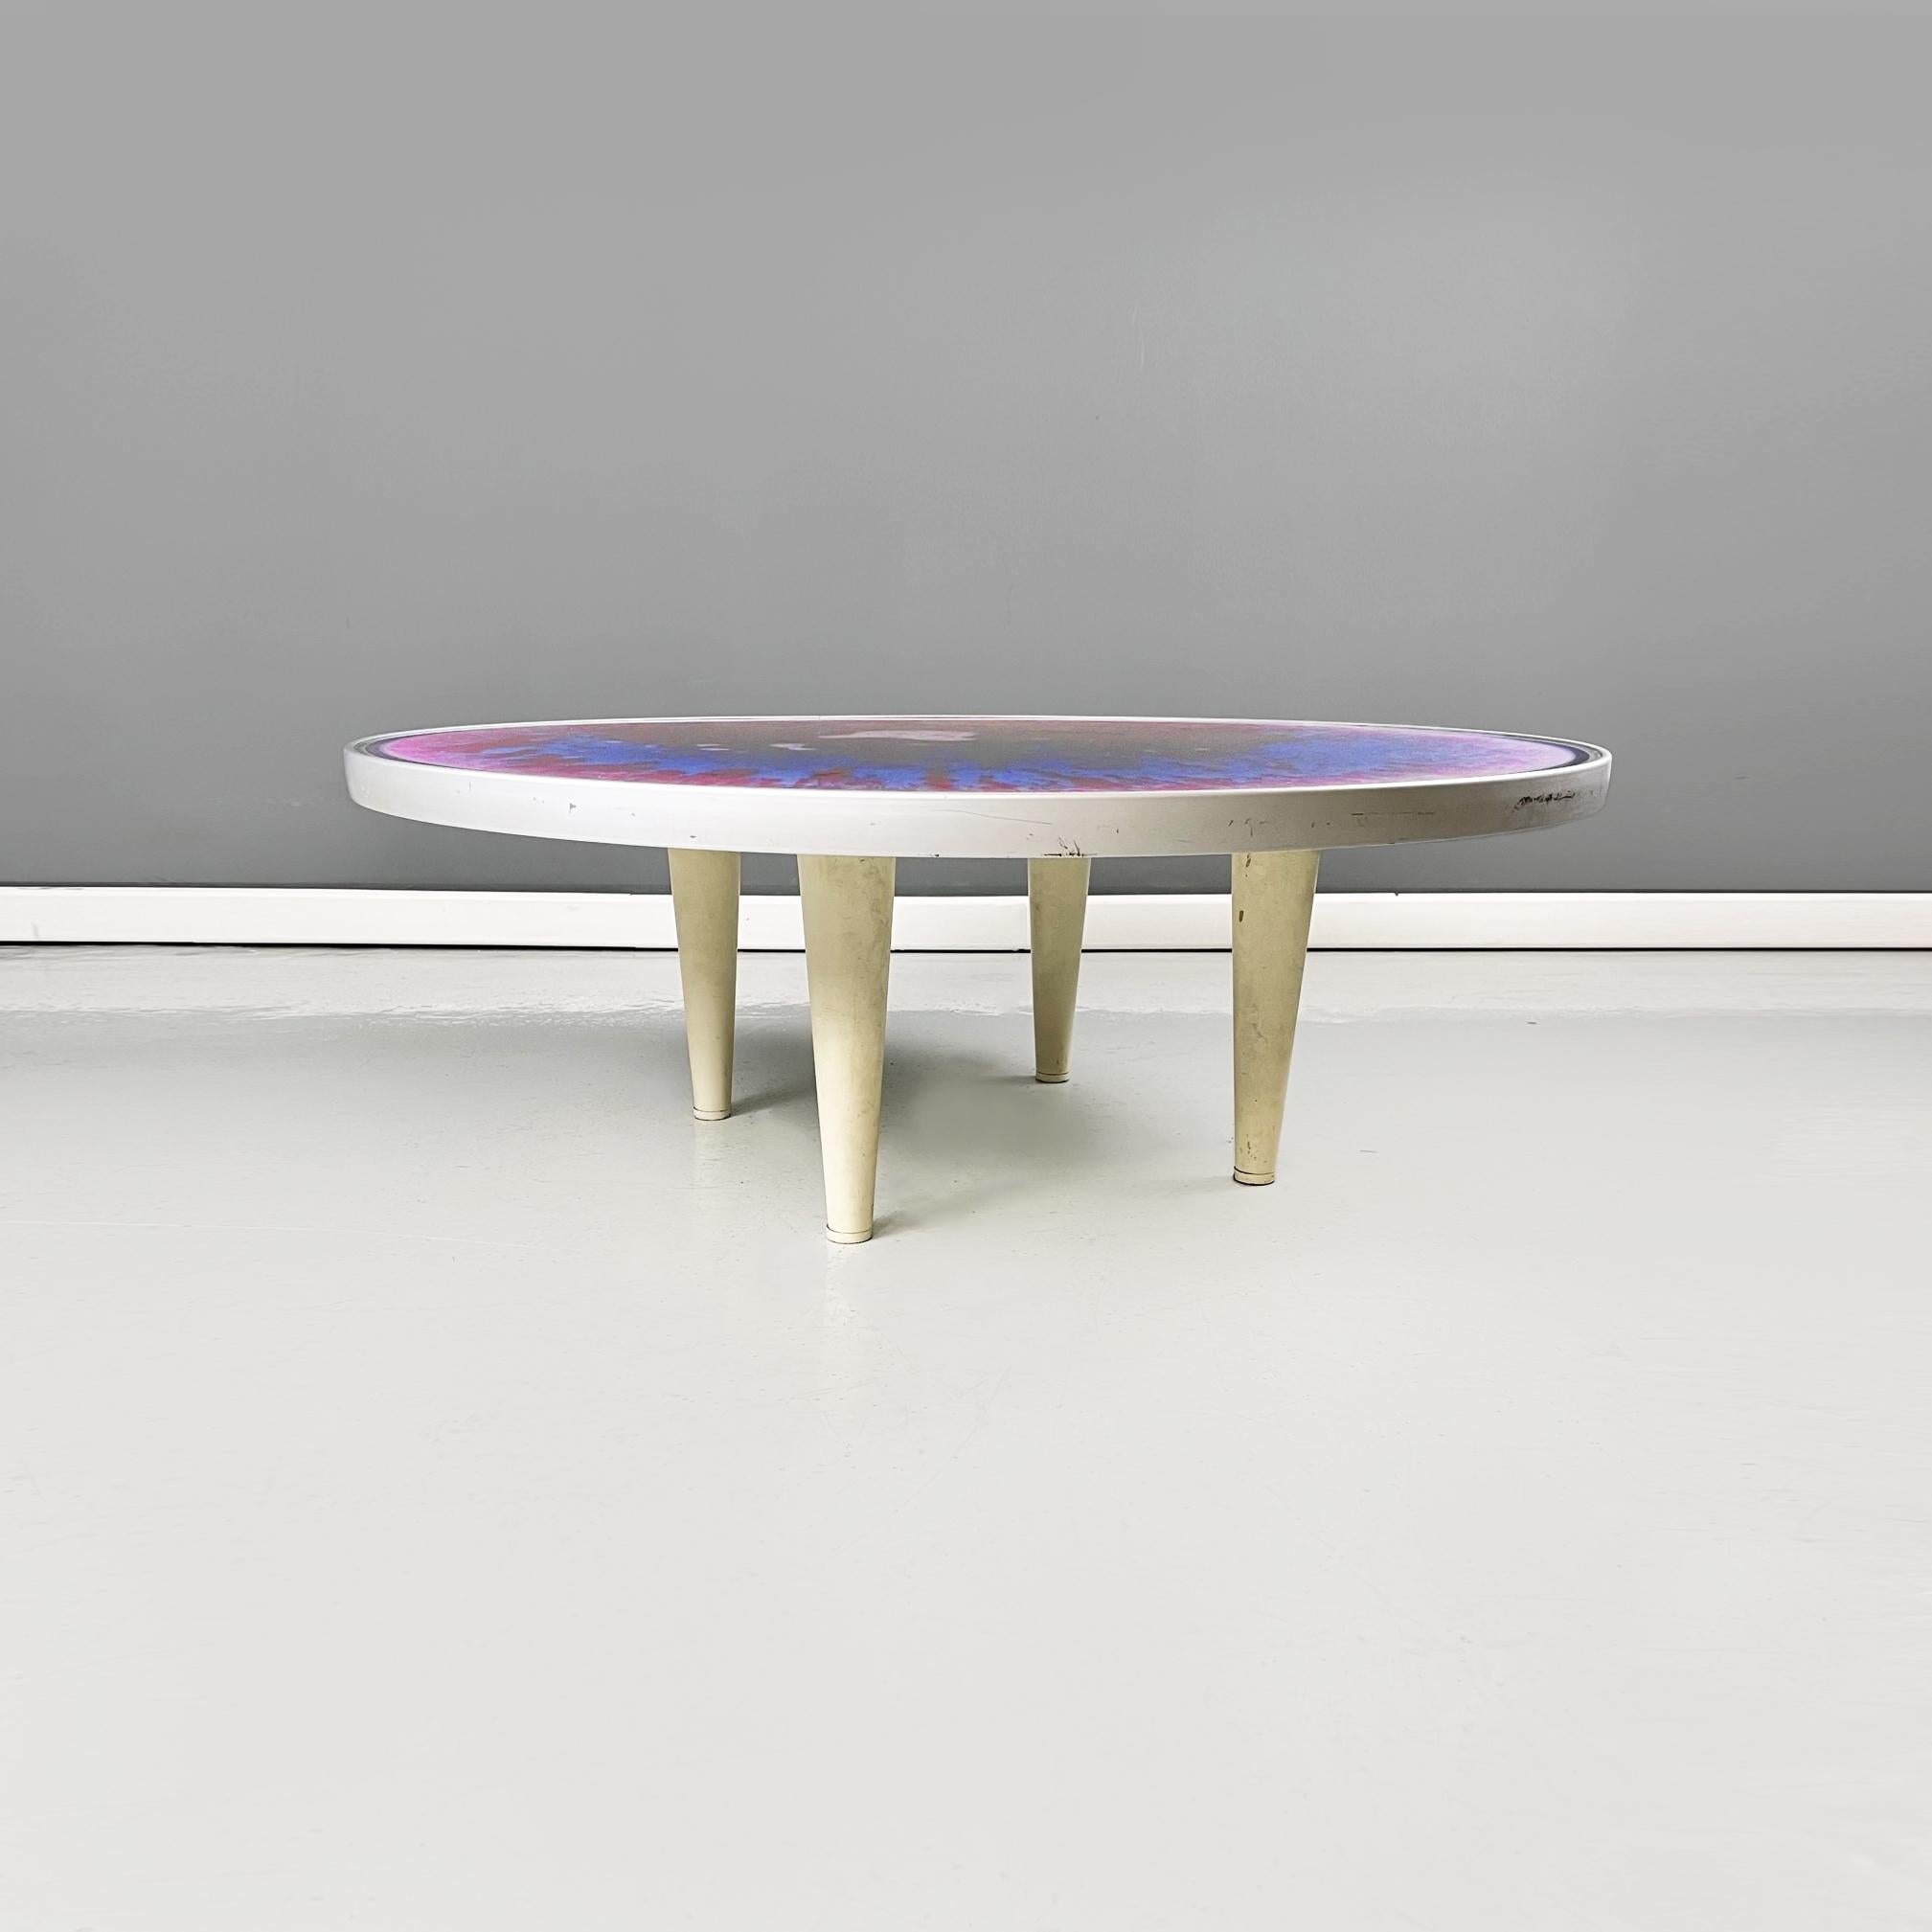 Italian space age Plastic and metal round coffee table with tie dye effect, 1970s.
Coffee table with round top in transparent plastic and metal profiles. On the top there are colored oils in pink-fuchsia and blue. Thanks to the movement or pressure